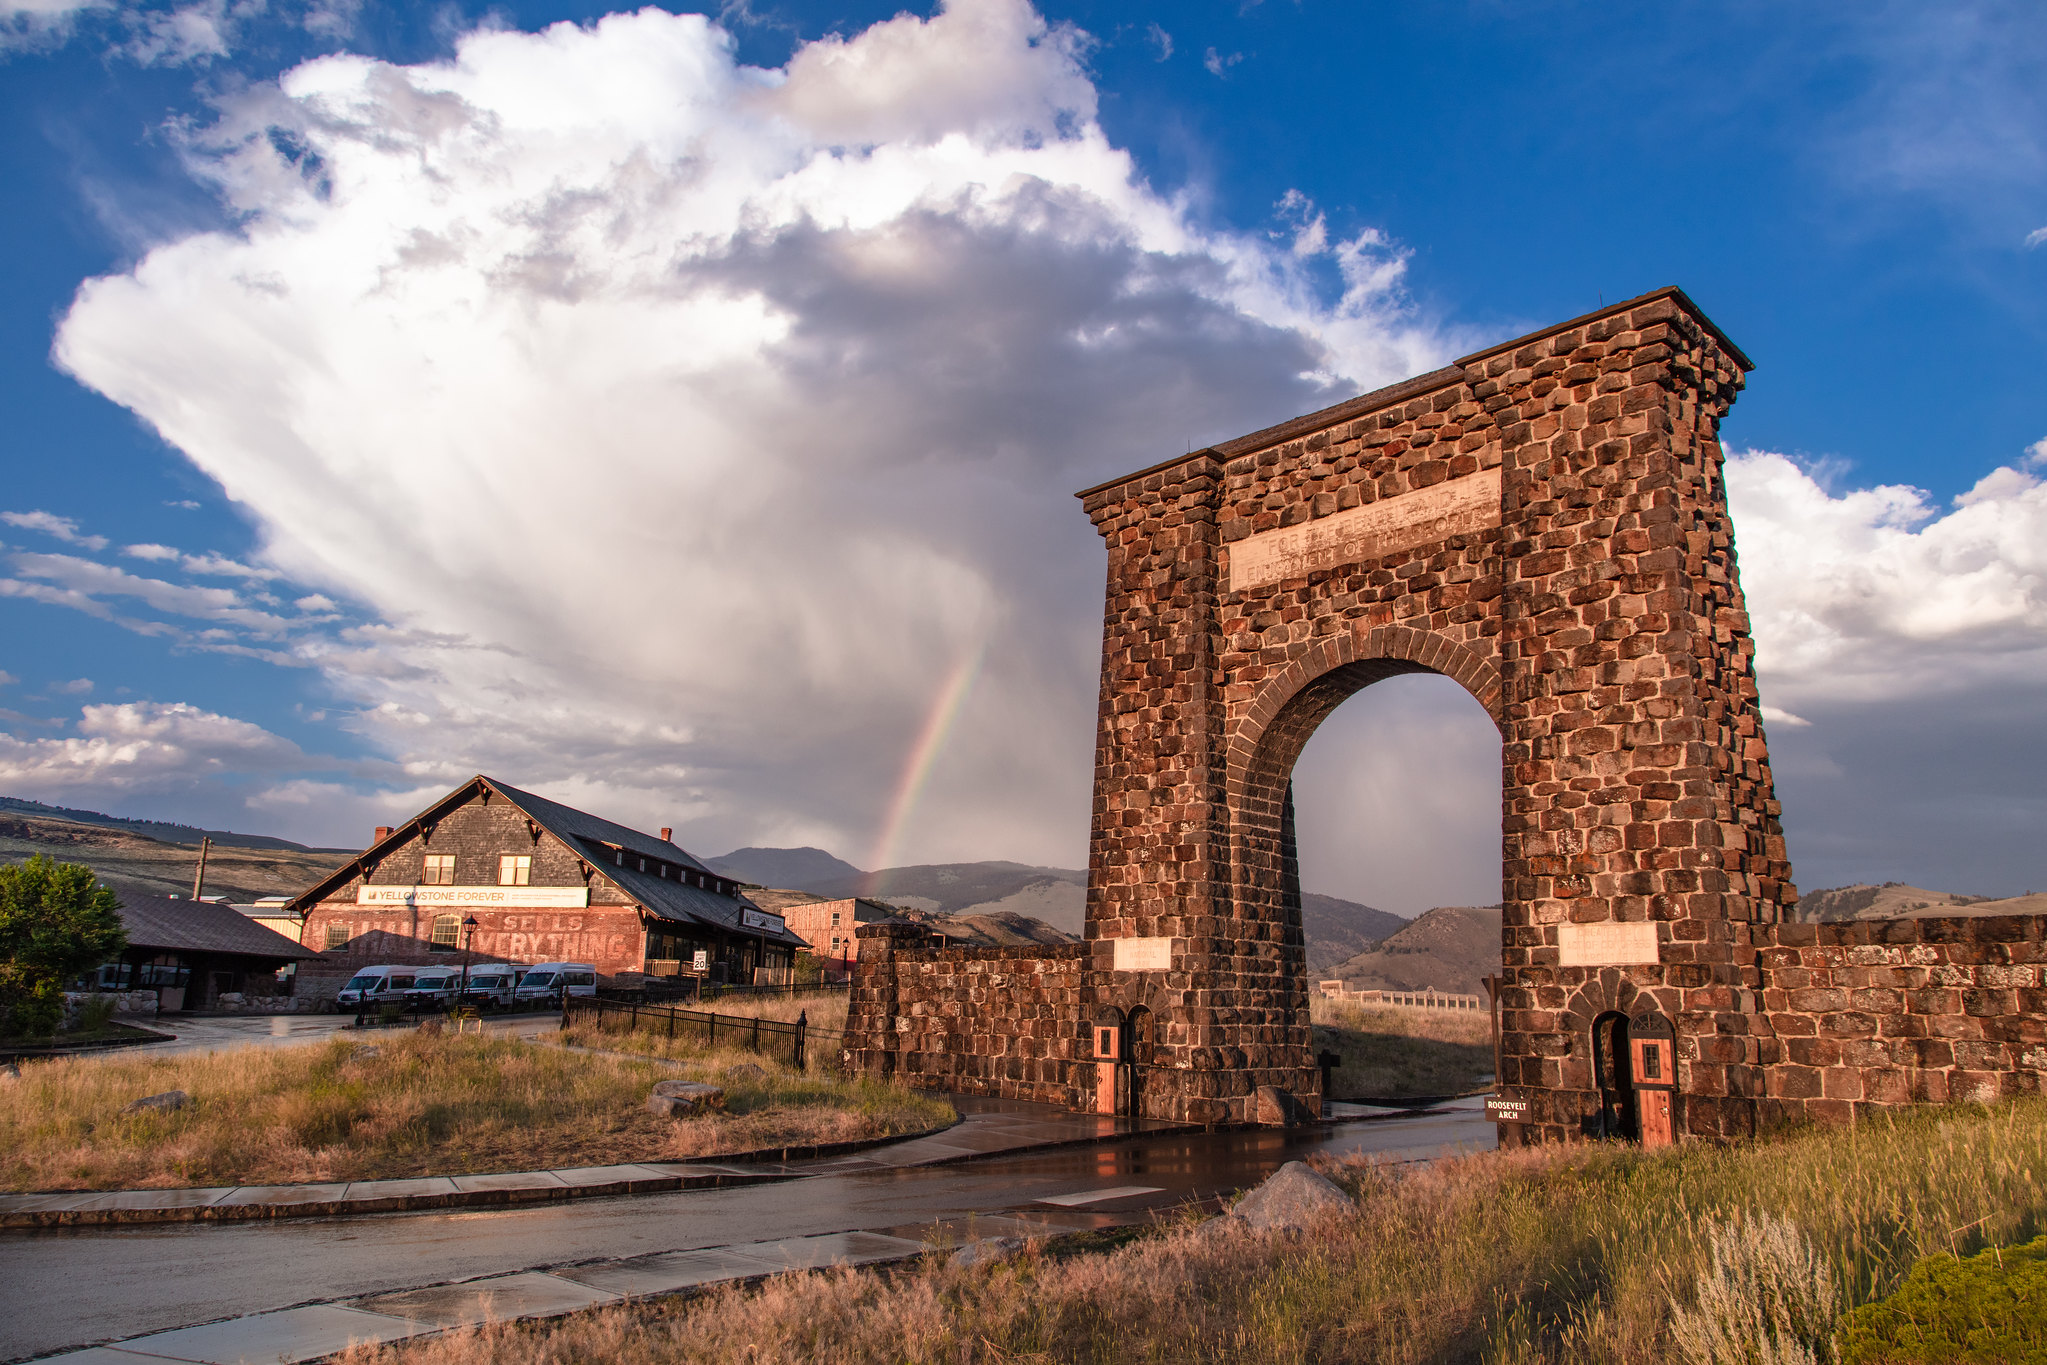 Roosevelt Arch with Gardiner MT in the background